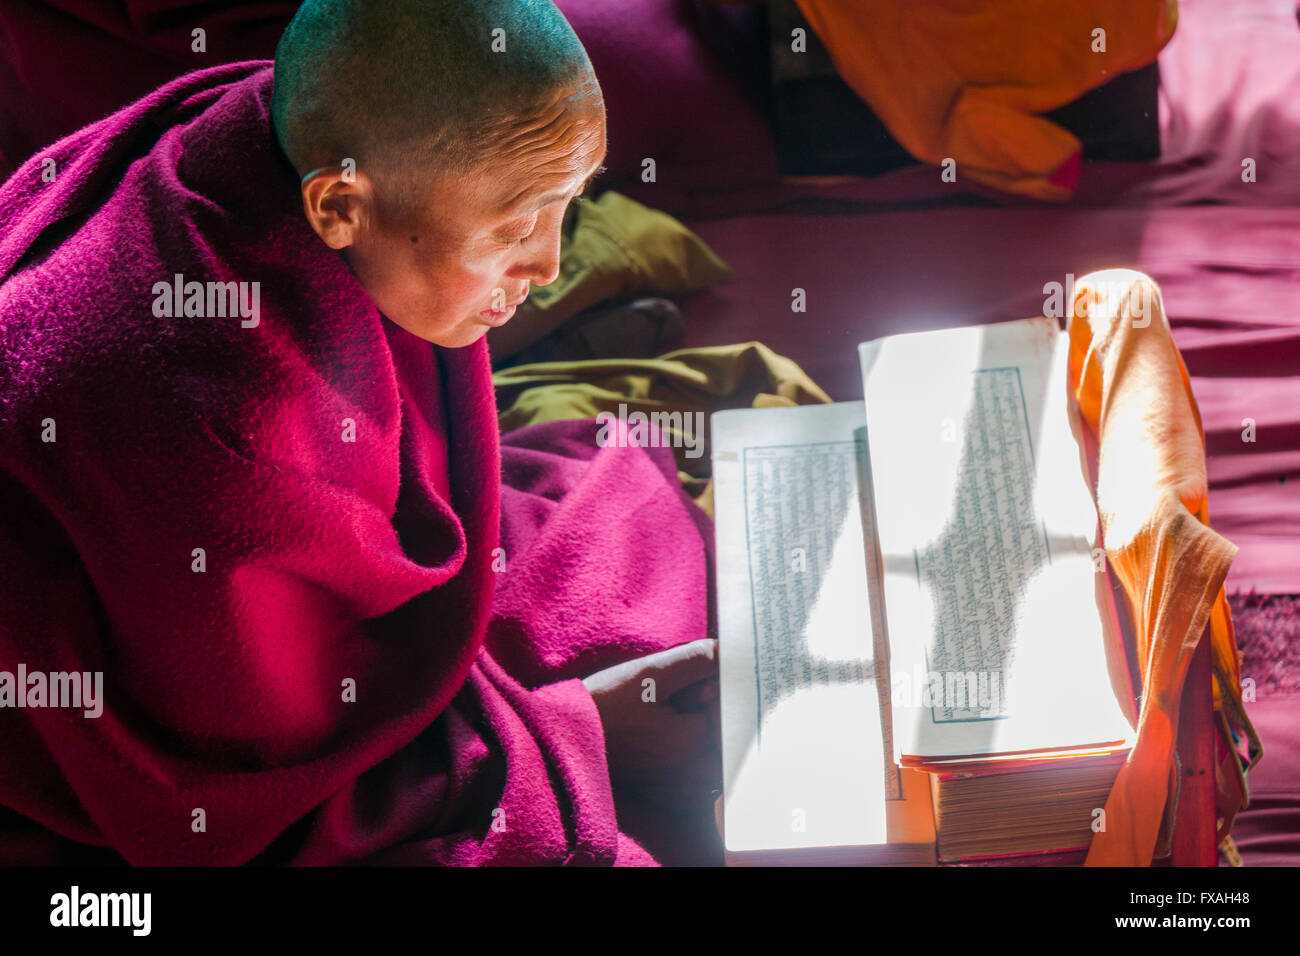 A monk is reading a prayer book inside the monastery Thupten Chholing Gompa, Junbesi, Solo Khumbu, Nepal Stock Photo